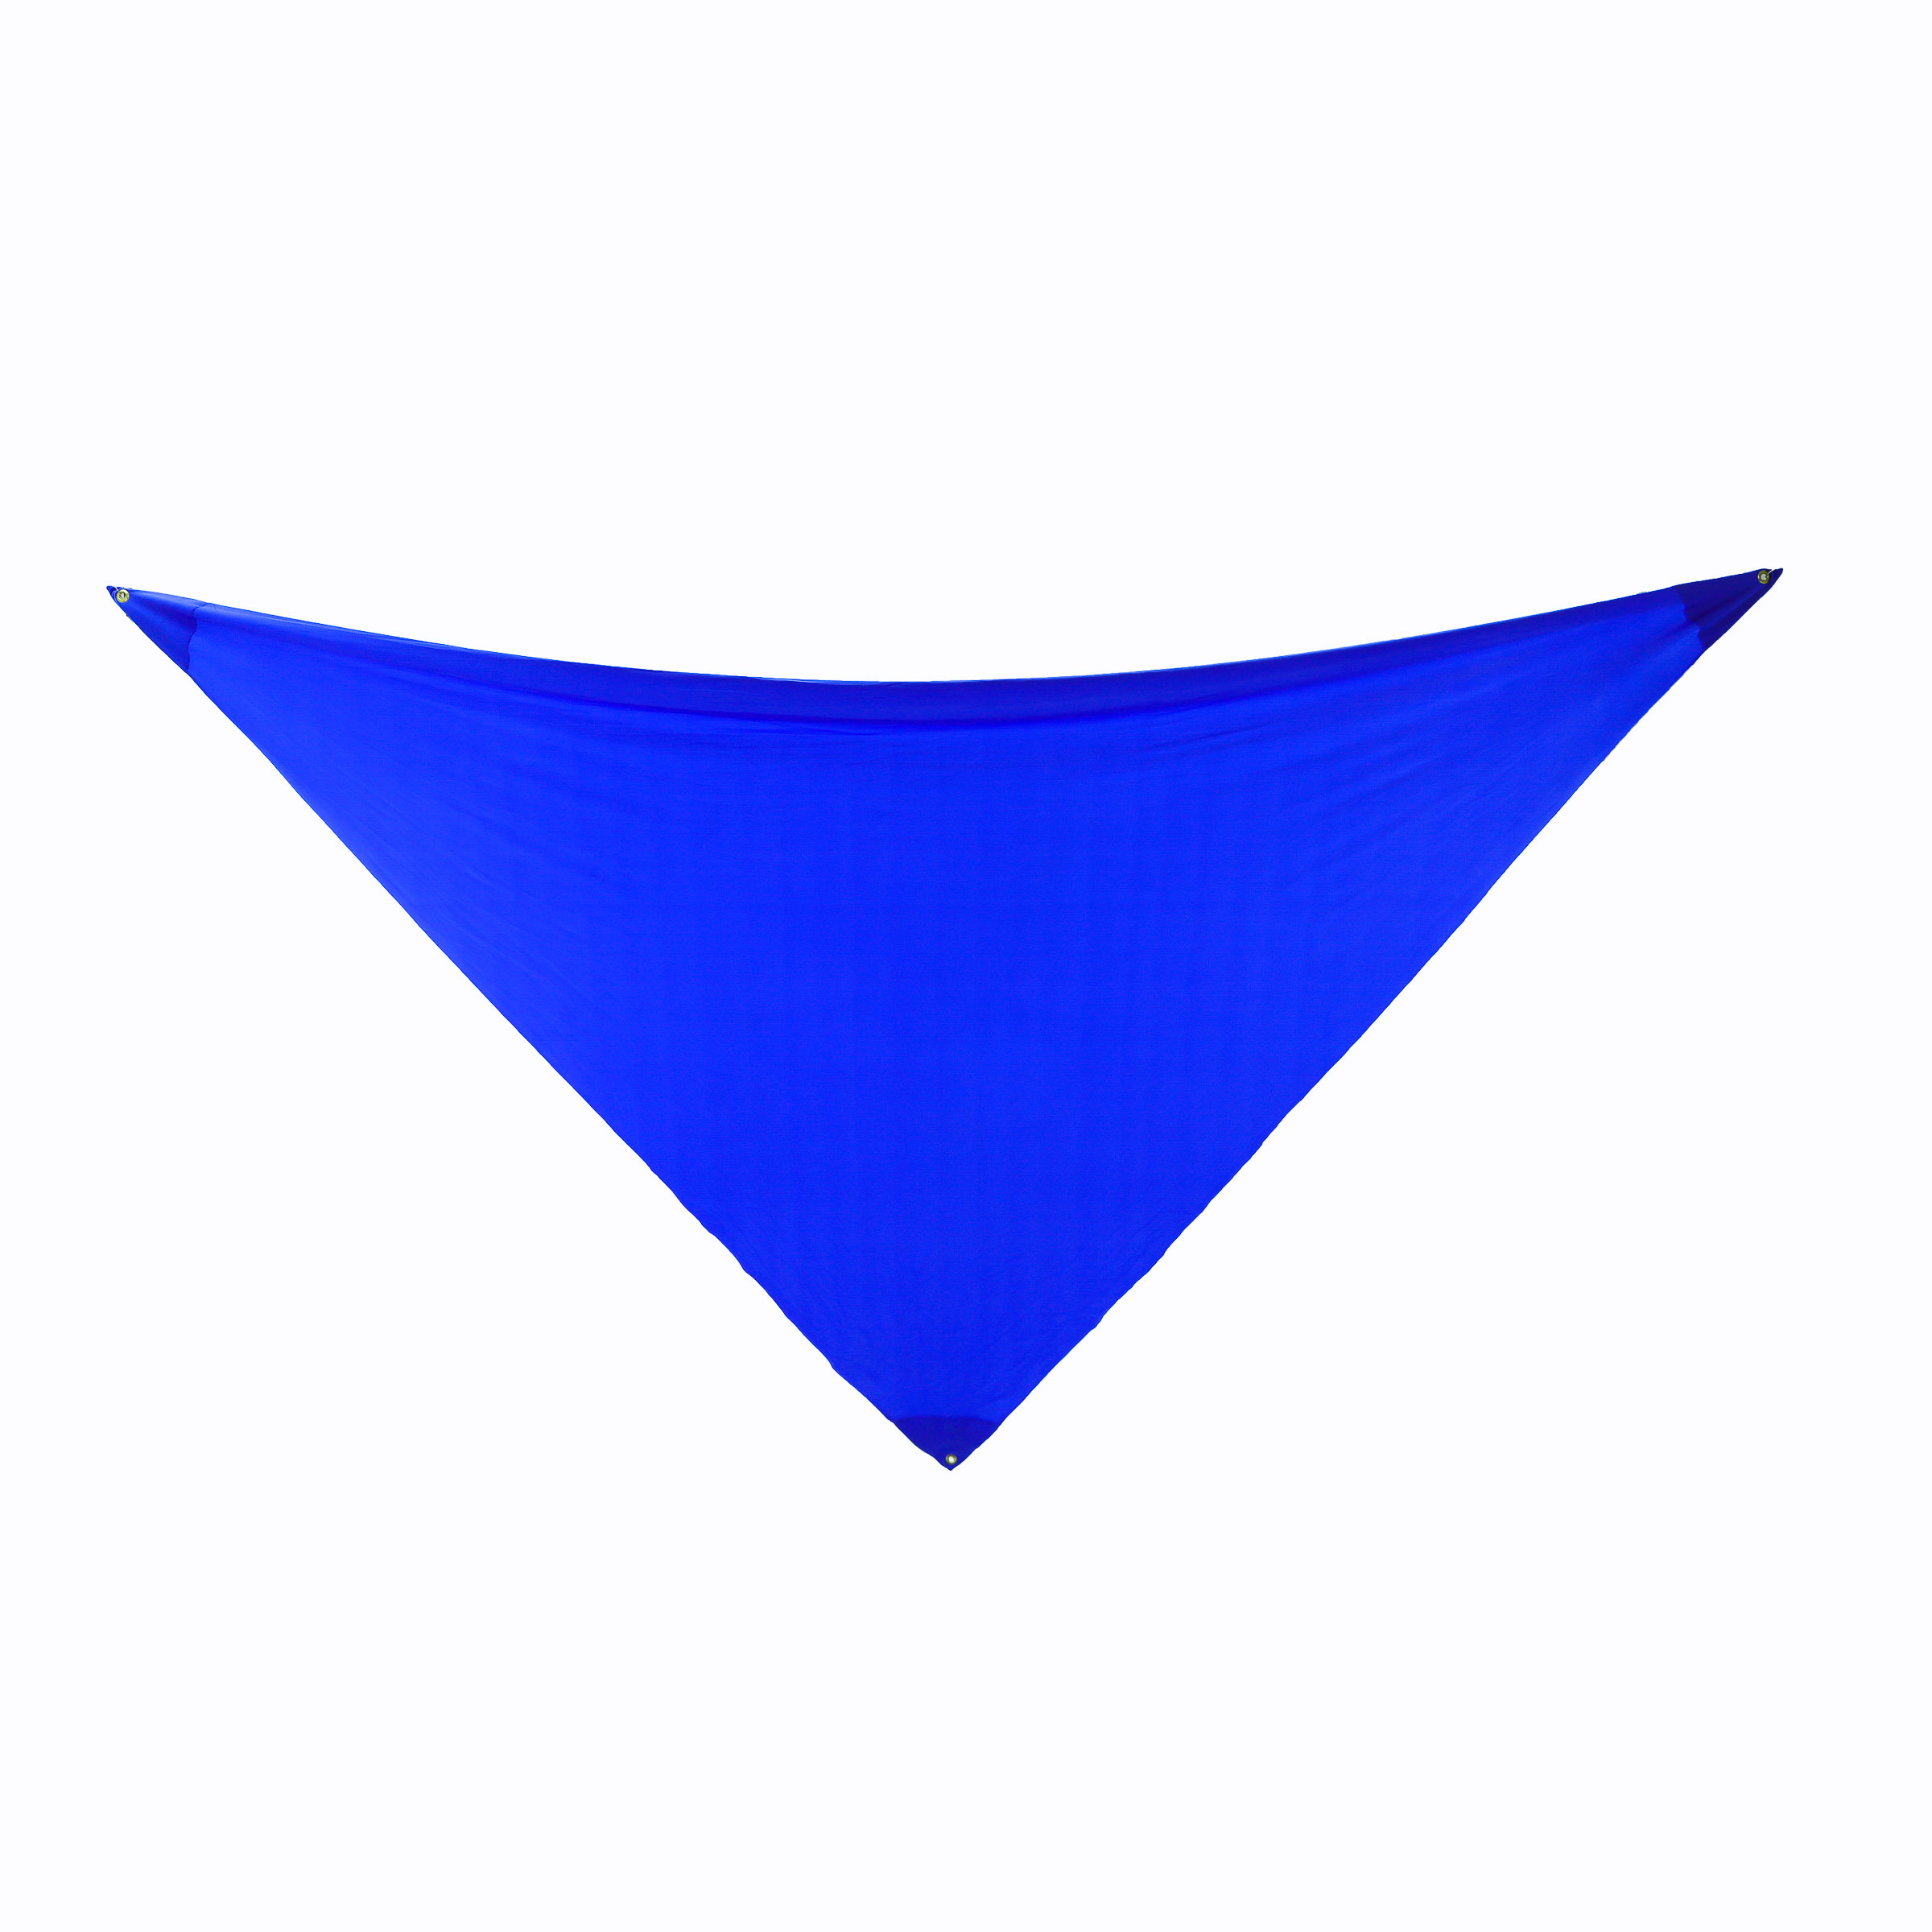 Sail - 3-point - Lycra - Blue, Styling Items | Roof draping and ceiling ...